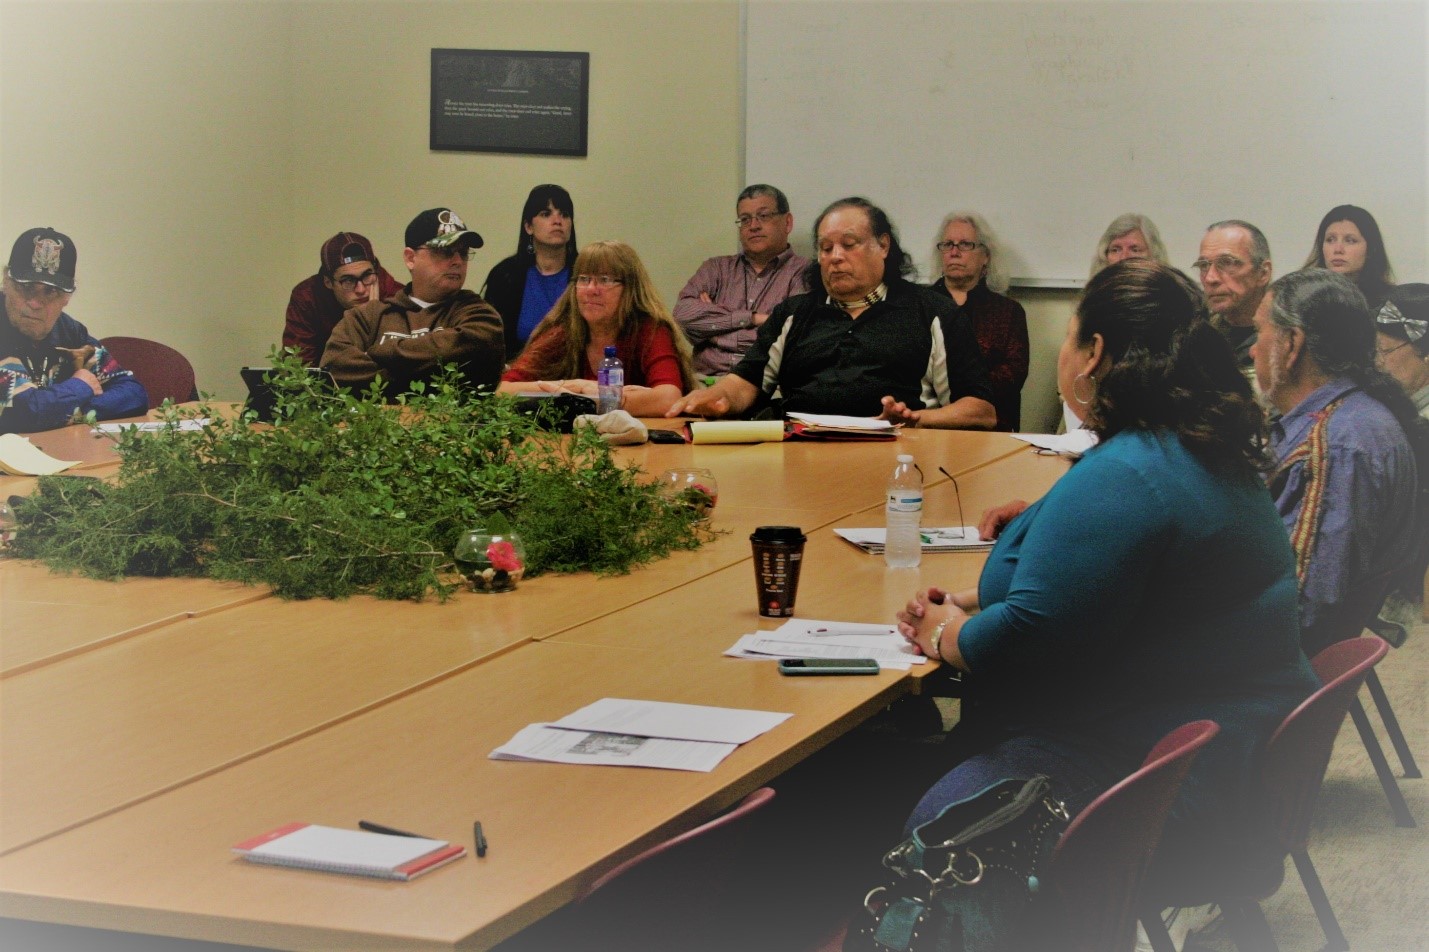 Tribal Leaders Meeting hosted by the Native American Studies Center